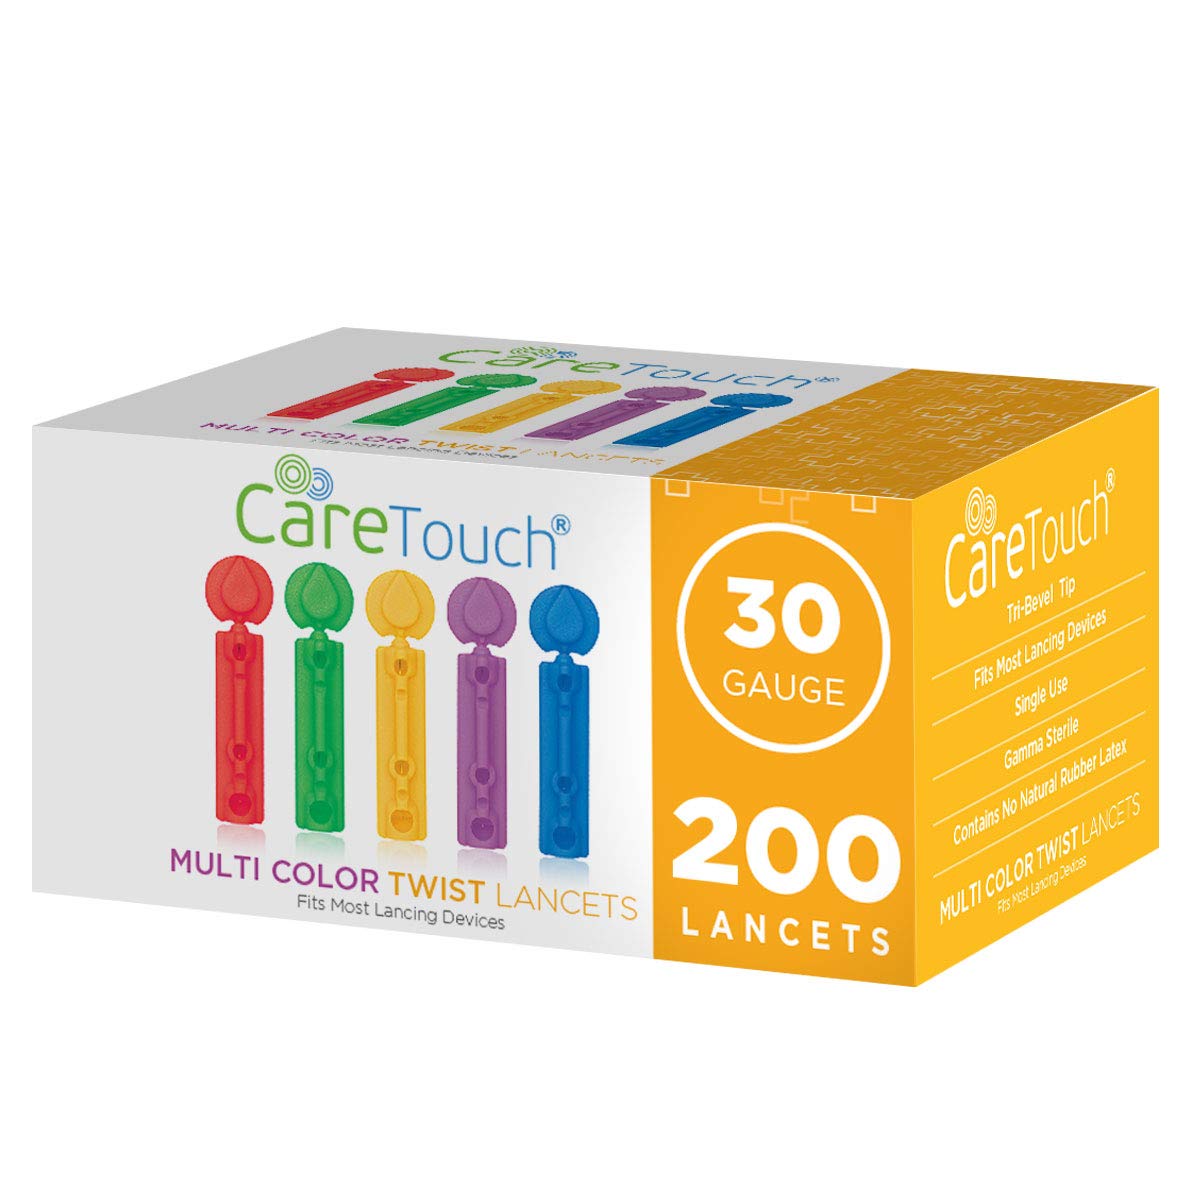 Care Touch Lancets for Diabetes Testing - 30 Gauge Diabetic Lancets for Blood Testing and Glucose Testing - Fits Most Lancing Devices - Ste